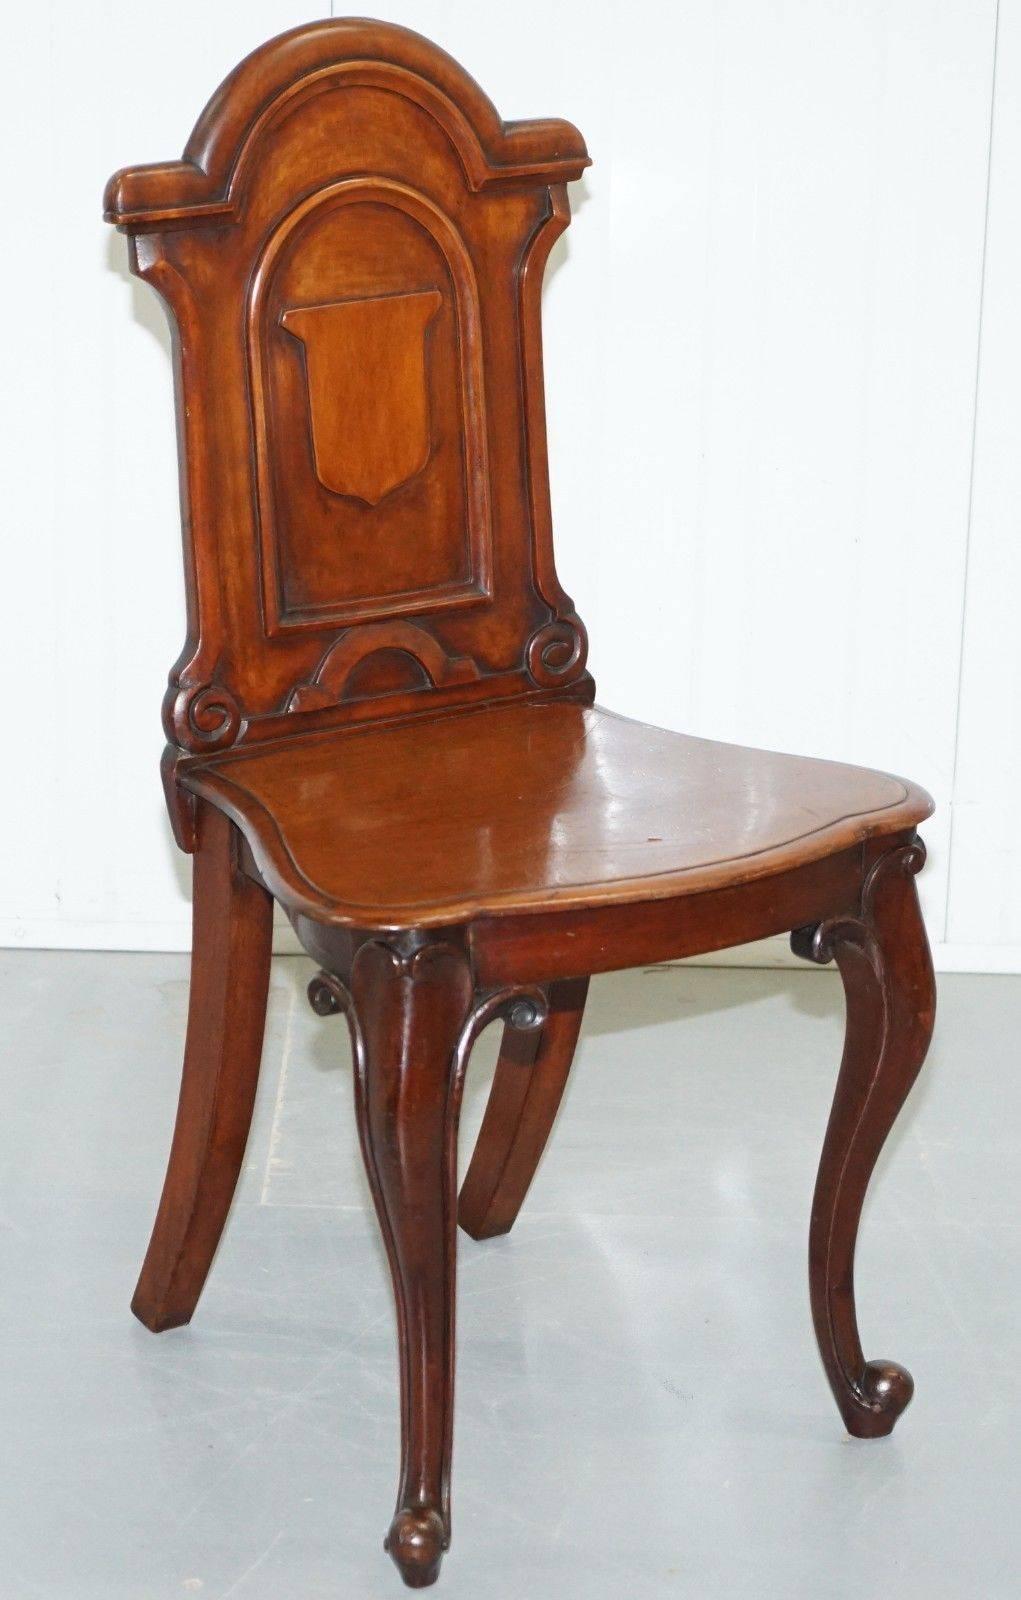 We are delighted to offer for sale this stunning pair of Regency mahogany shield back hall chairs, circa 1830

A very good looking and well made pair with a nice vintage patina, we have cleaned waxed and polished them from top to